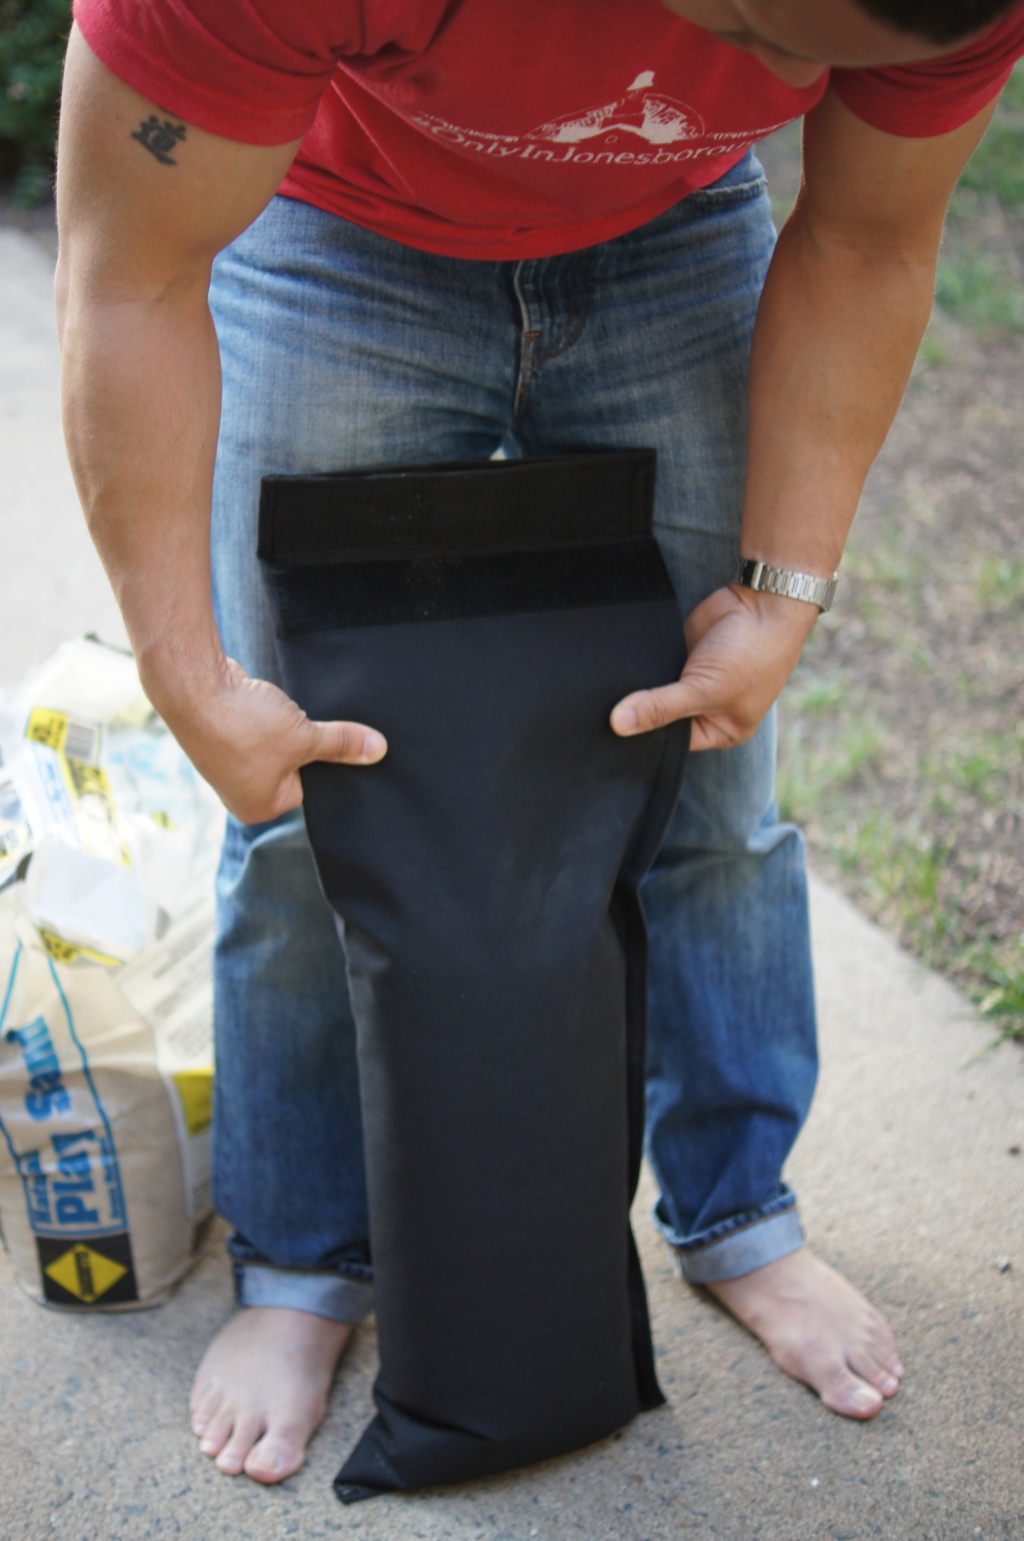 Rep Fitness How to Fill Your Sandbag Pinterest Image 8